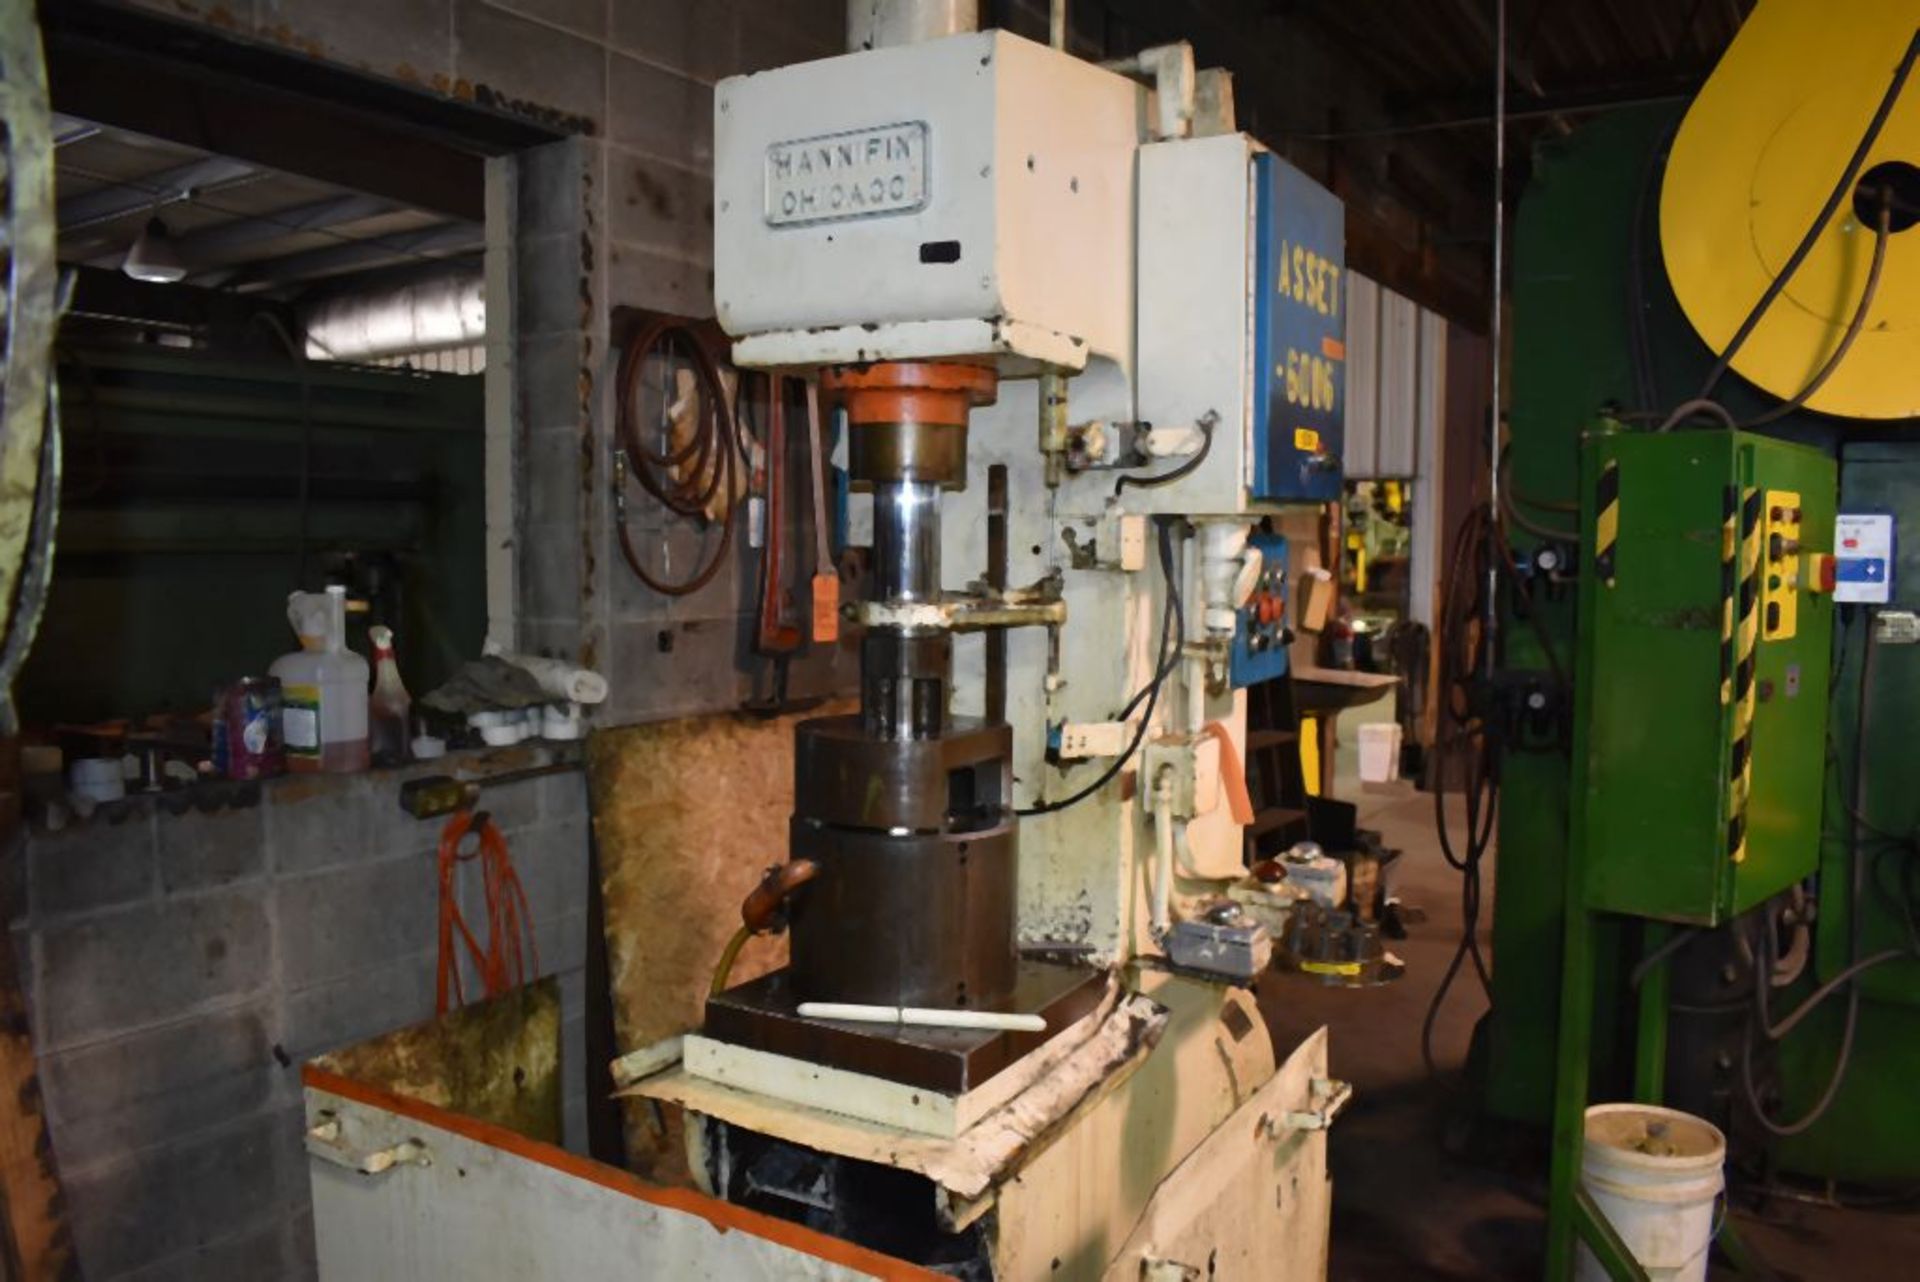 HANNIFIN HYDRAULIC PRESS, DUAL PALM BUTTONS, 12" STR., 7.5 H.P. MOTOR - Image 2 of 4